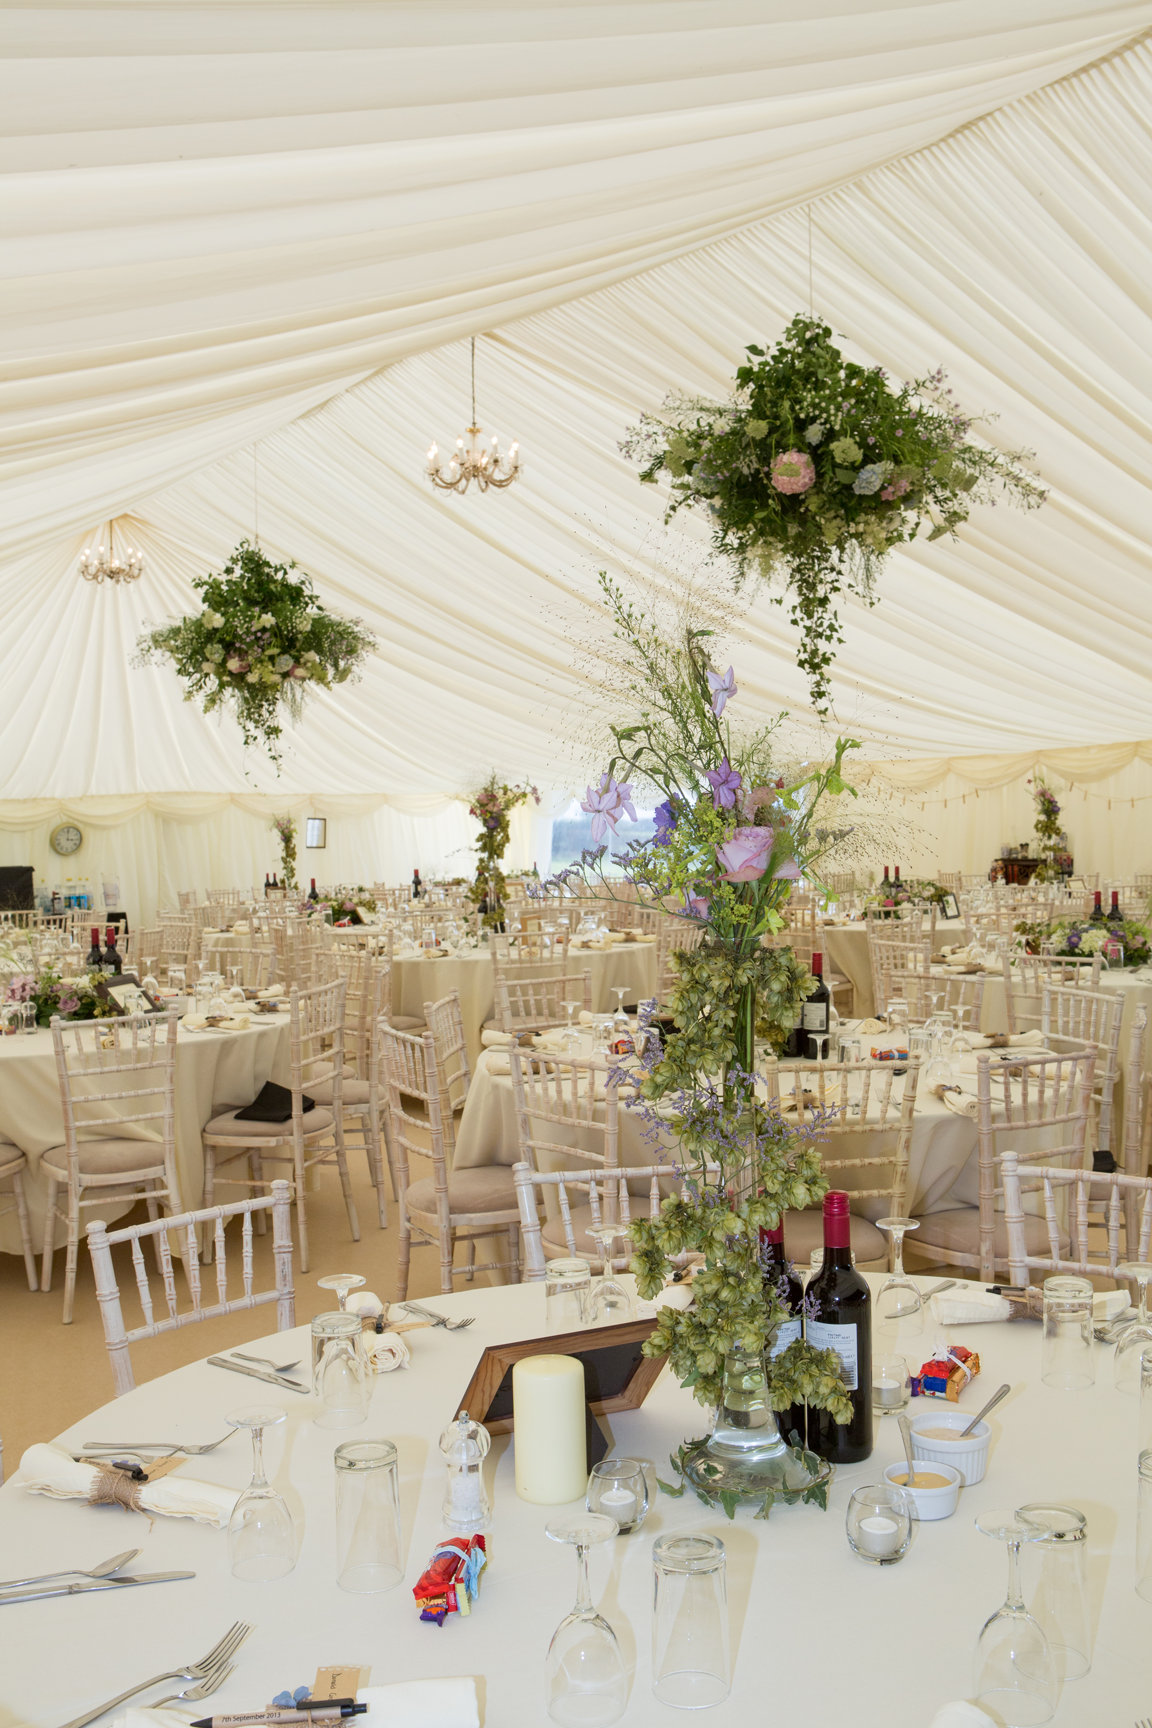 Tents marquee inside table and chairs